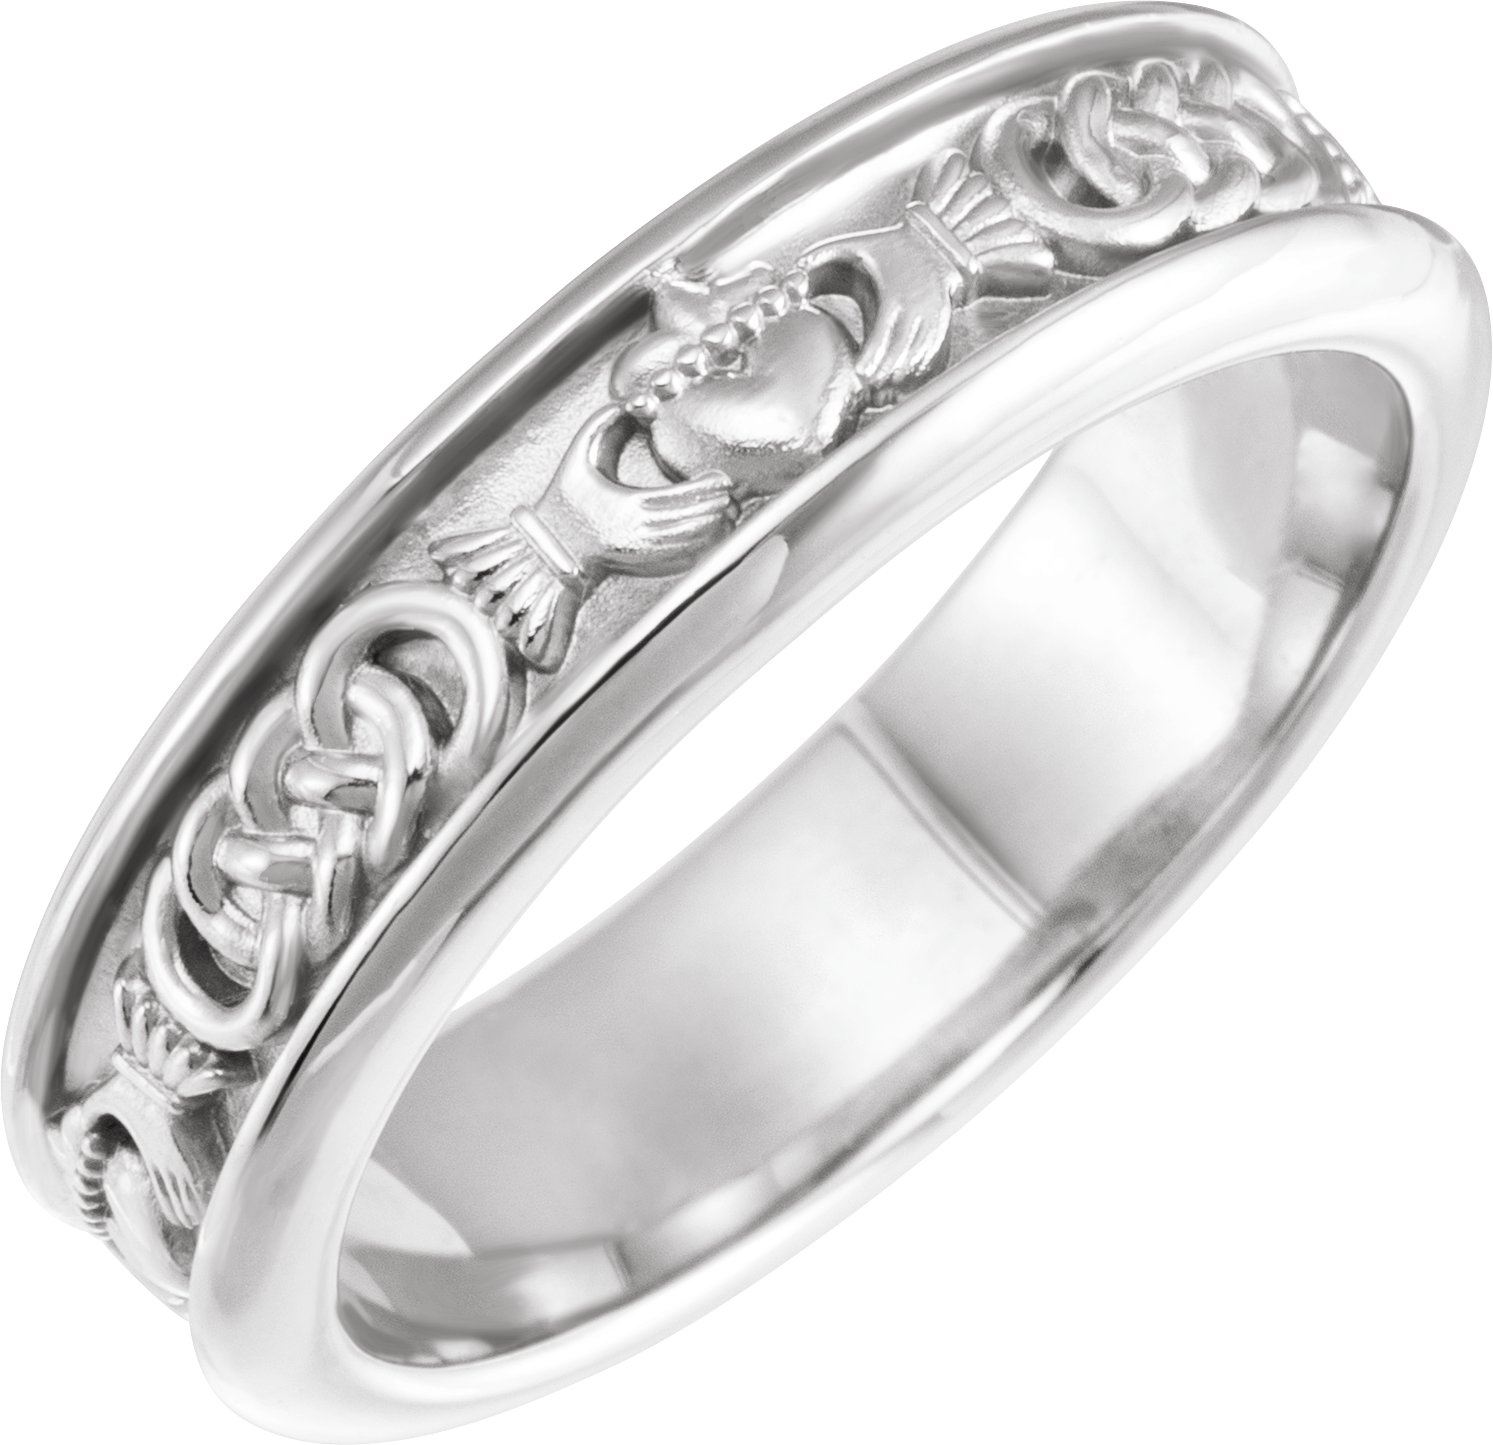 Continuum Sterling Silver Claddagh Ring Size 8.5